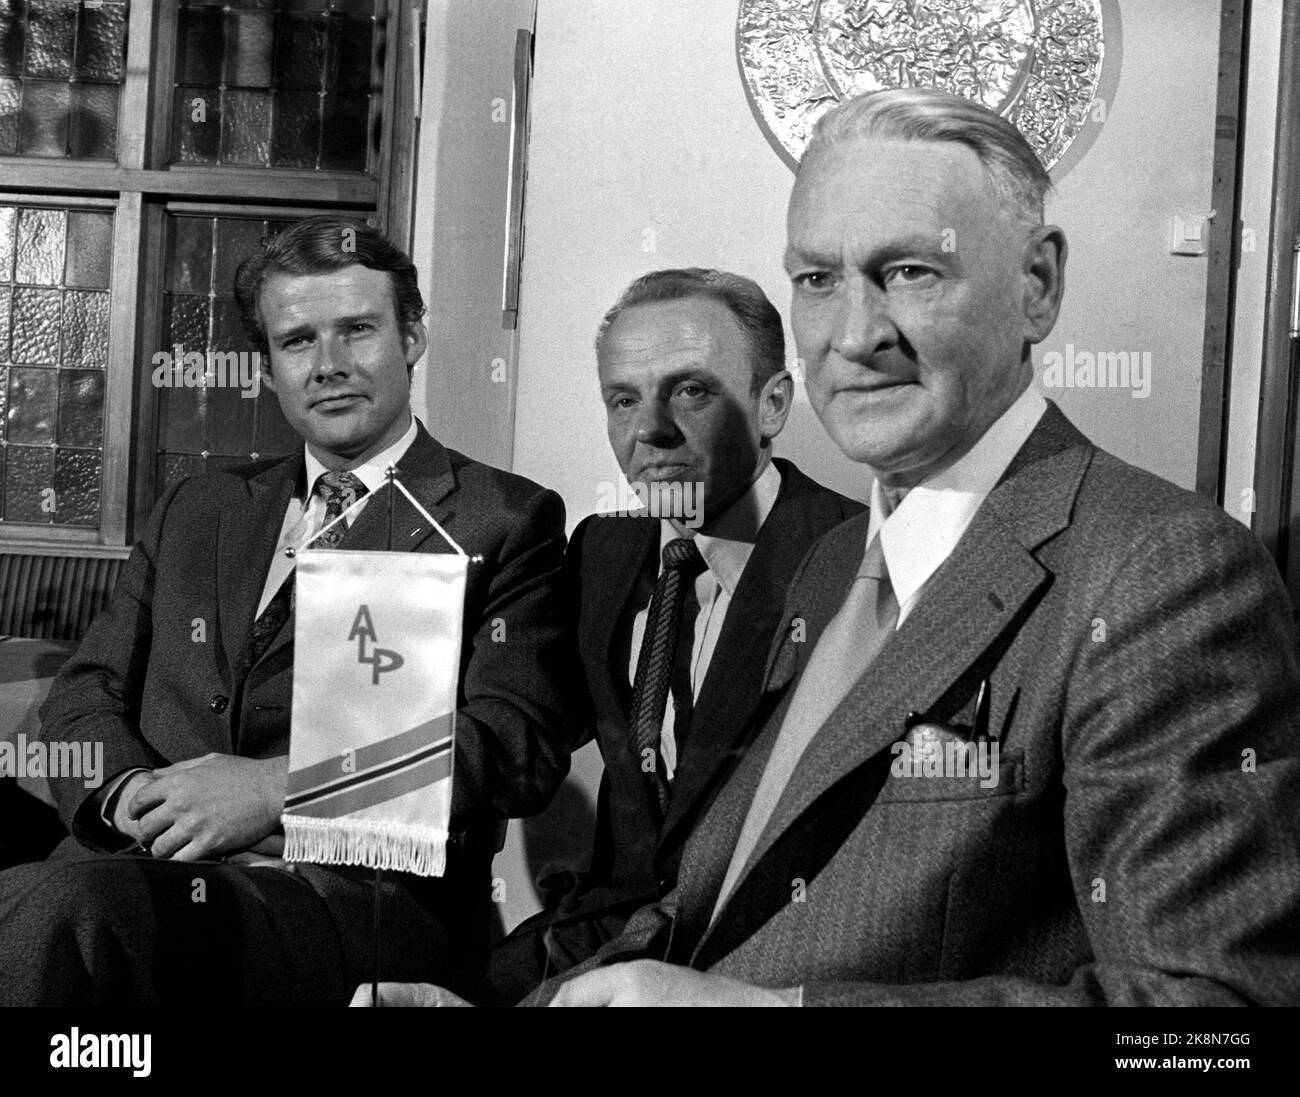 Oslo 19750428. Press conference on the merger of Anders Lange's party and the Reform Party. The chairman of the Party also wants his party to join the Alp. Eg. Storting representative Carl I. Hagen, the Reform Party, Svein Berg, chairman of the Party's party, and Arve Lønnum, chairman of Anders Lange's party. Photo Henrik Laurvik / NTB Stock Photo